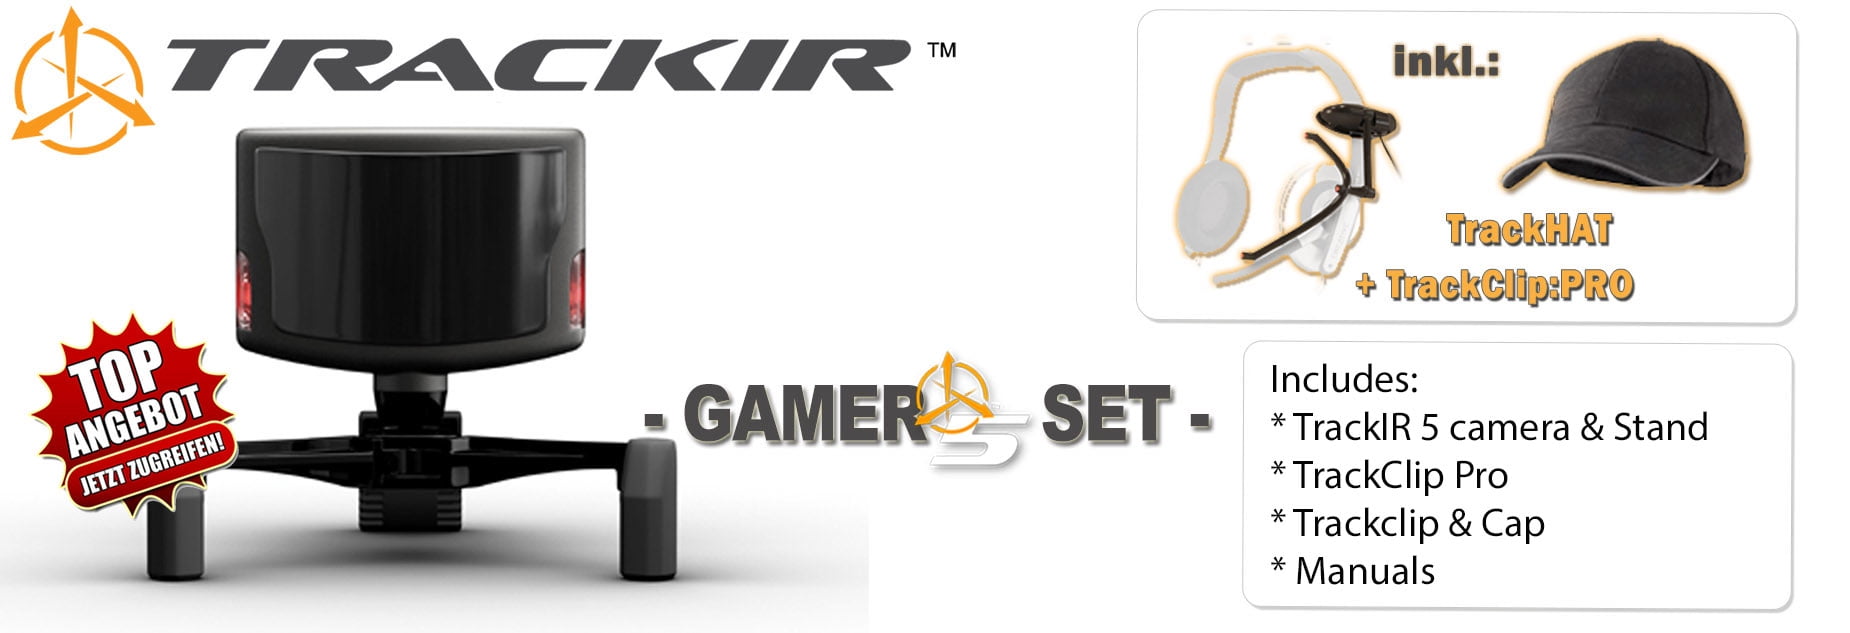 TrackIR 5 Head Tracking System for PC Gaming with IR High Resolution  Trackclip Pro + Cap Bundle 